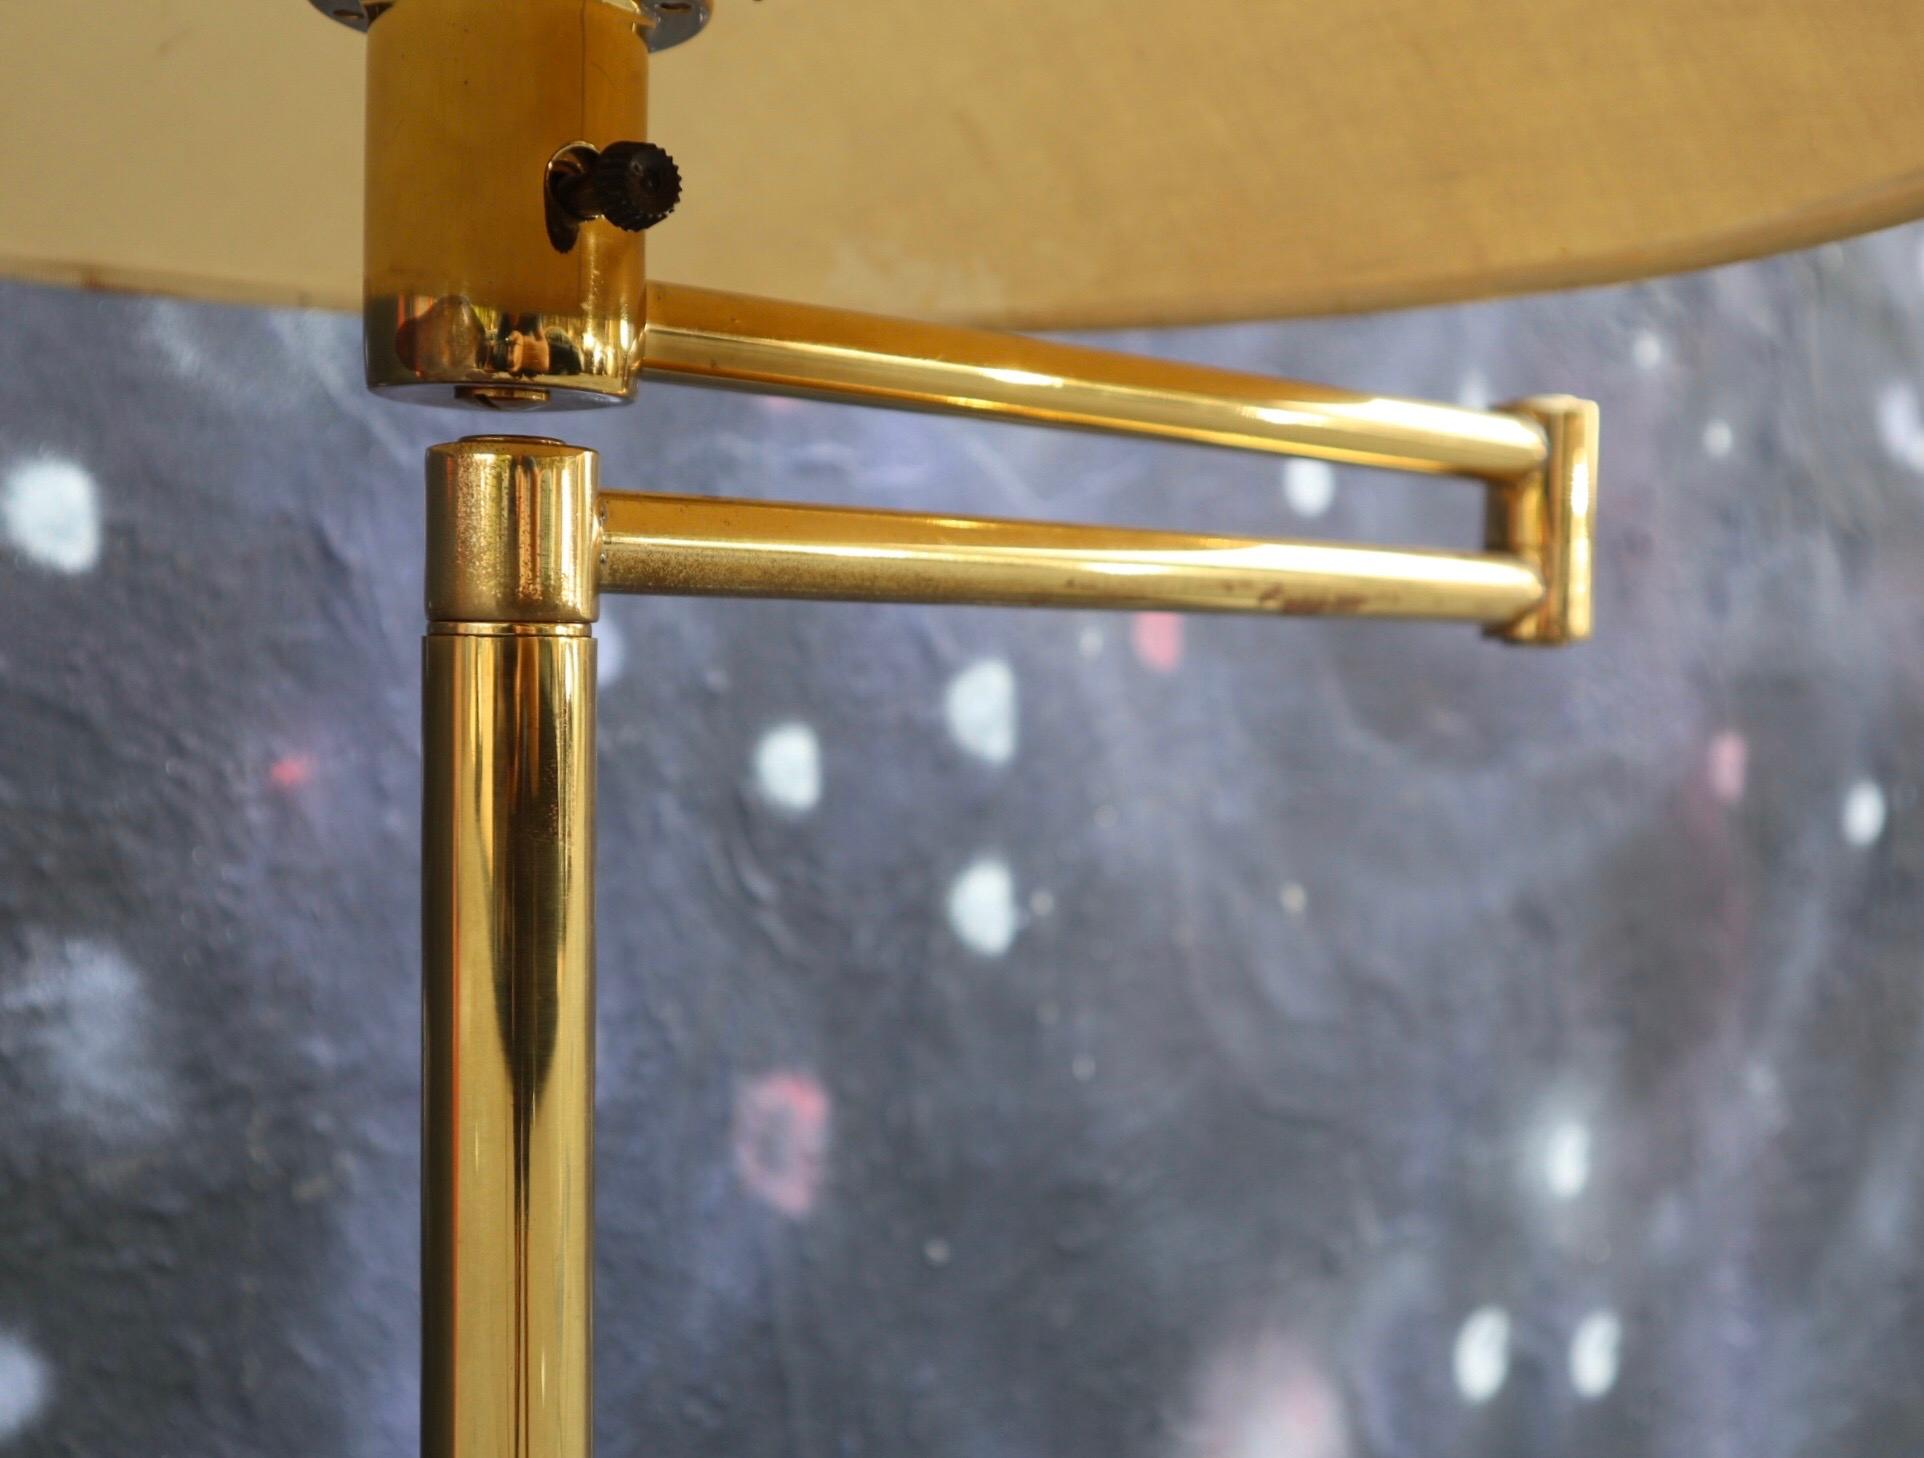 Walter Van Nessen brass floor lamp. Swing arm extends with original shade. Works great. Normal wear to lamp base and shade. Lamp adjusts in height from 49